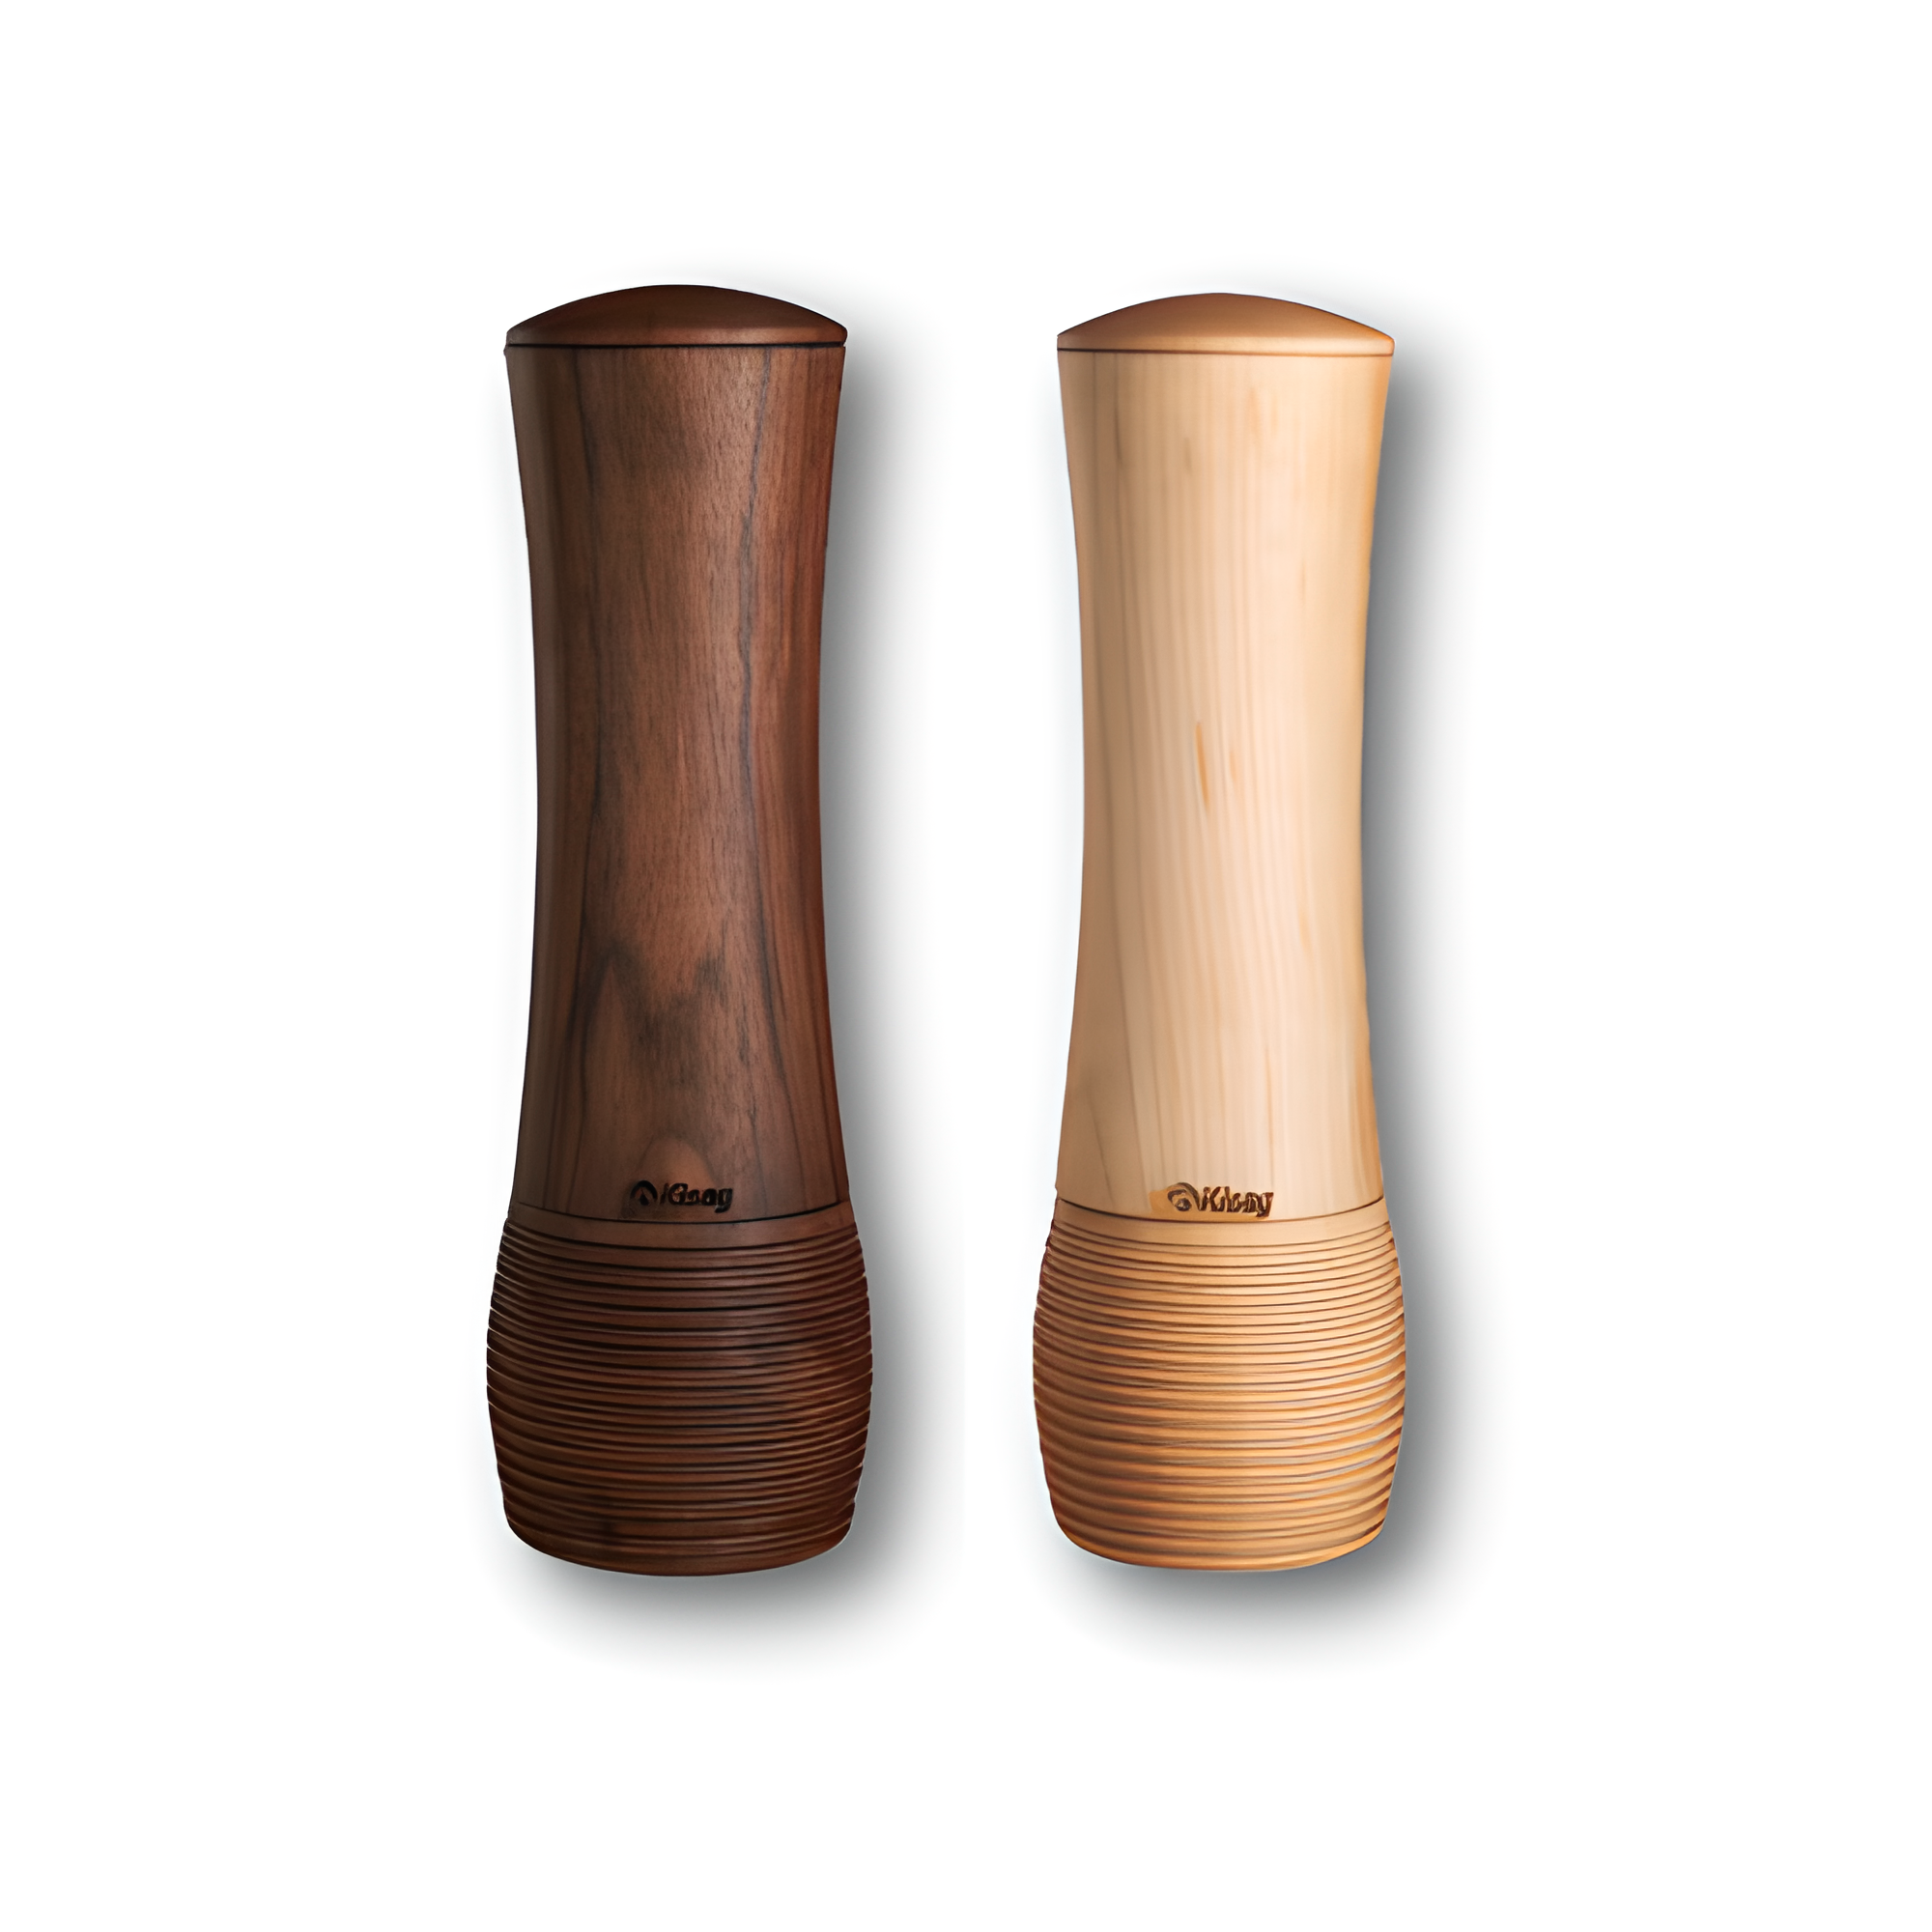 Kisag Artisan Salt and Pepper Mill - Black Walnut and Maple Finishes